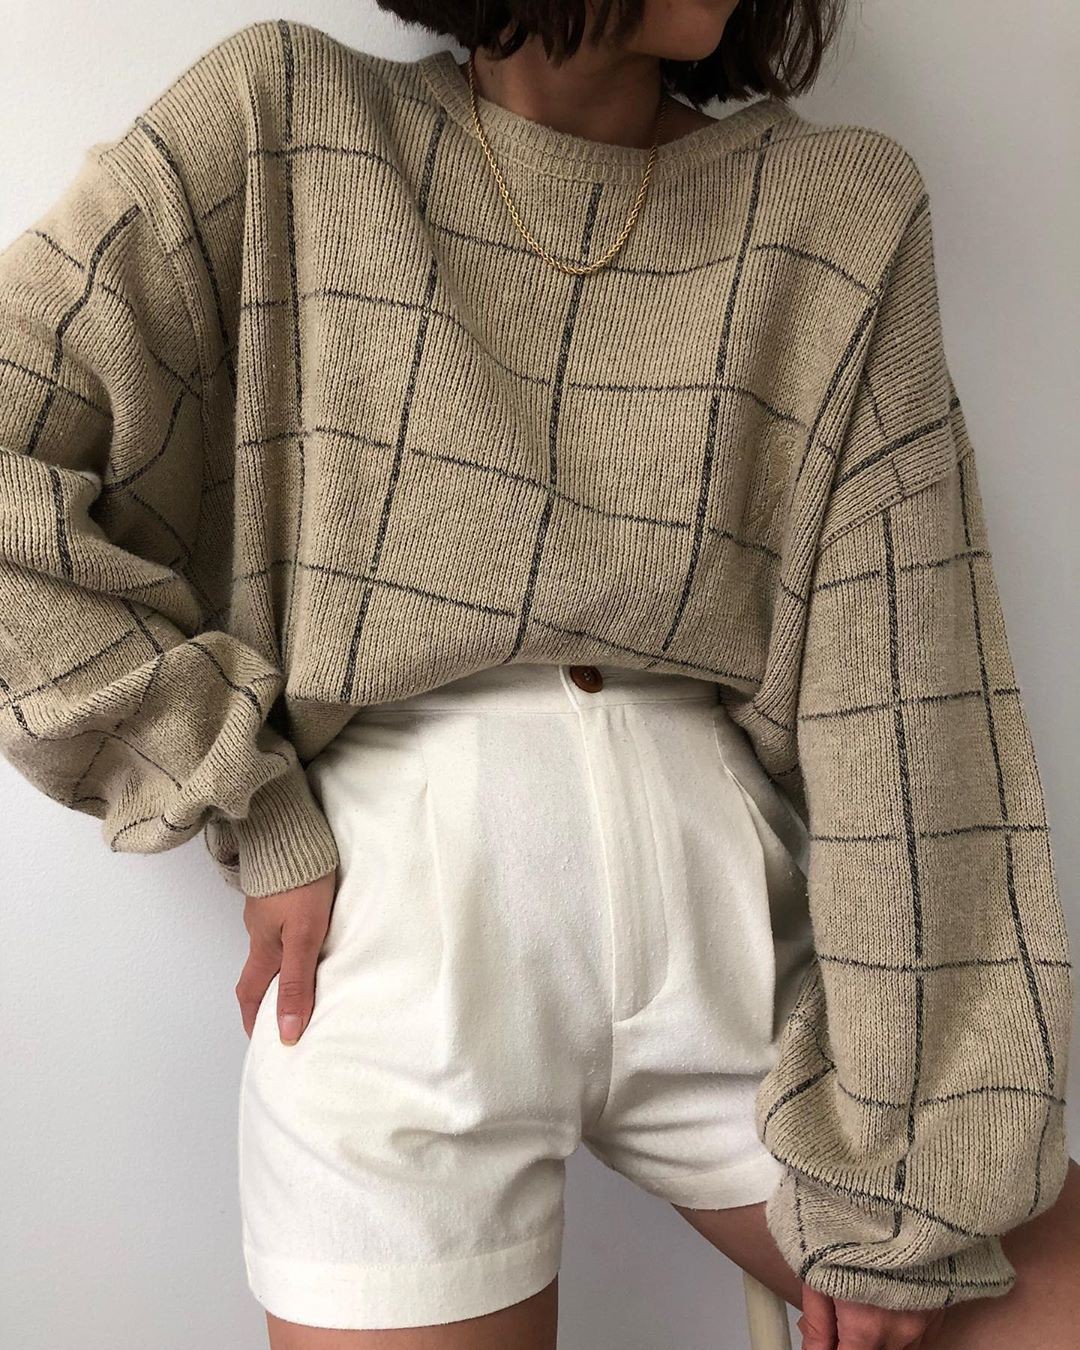 Khaki and beige clothing ideas with vintage clothing, retro style, trousers: Vintage clothing,  Retro style,  Khaki And Beige Outfit,  Loungewear Dresses  